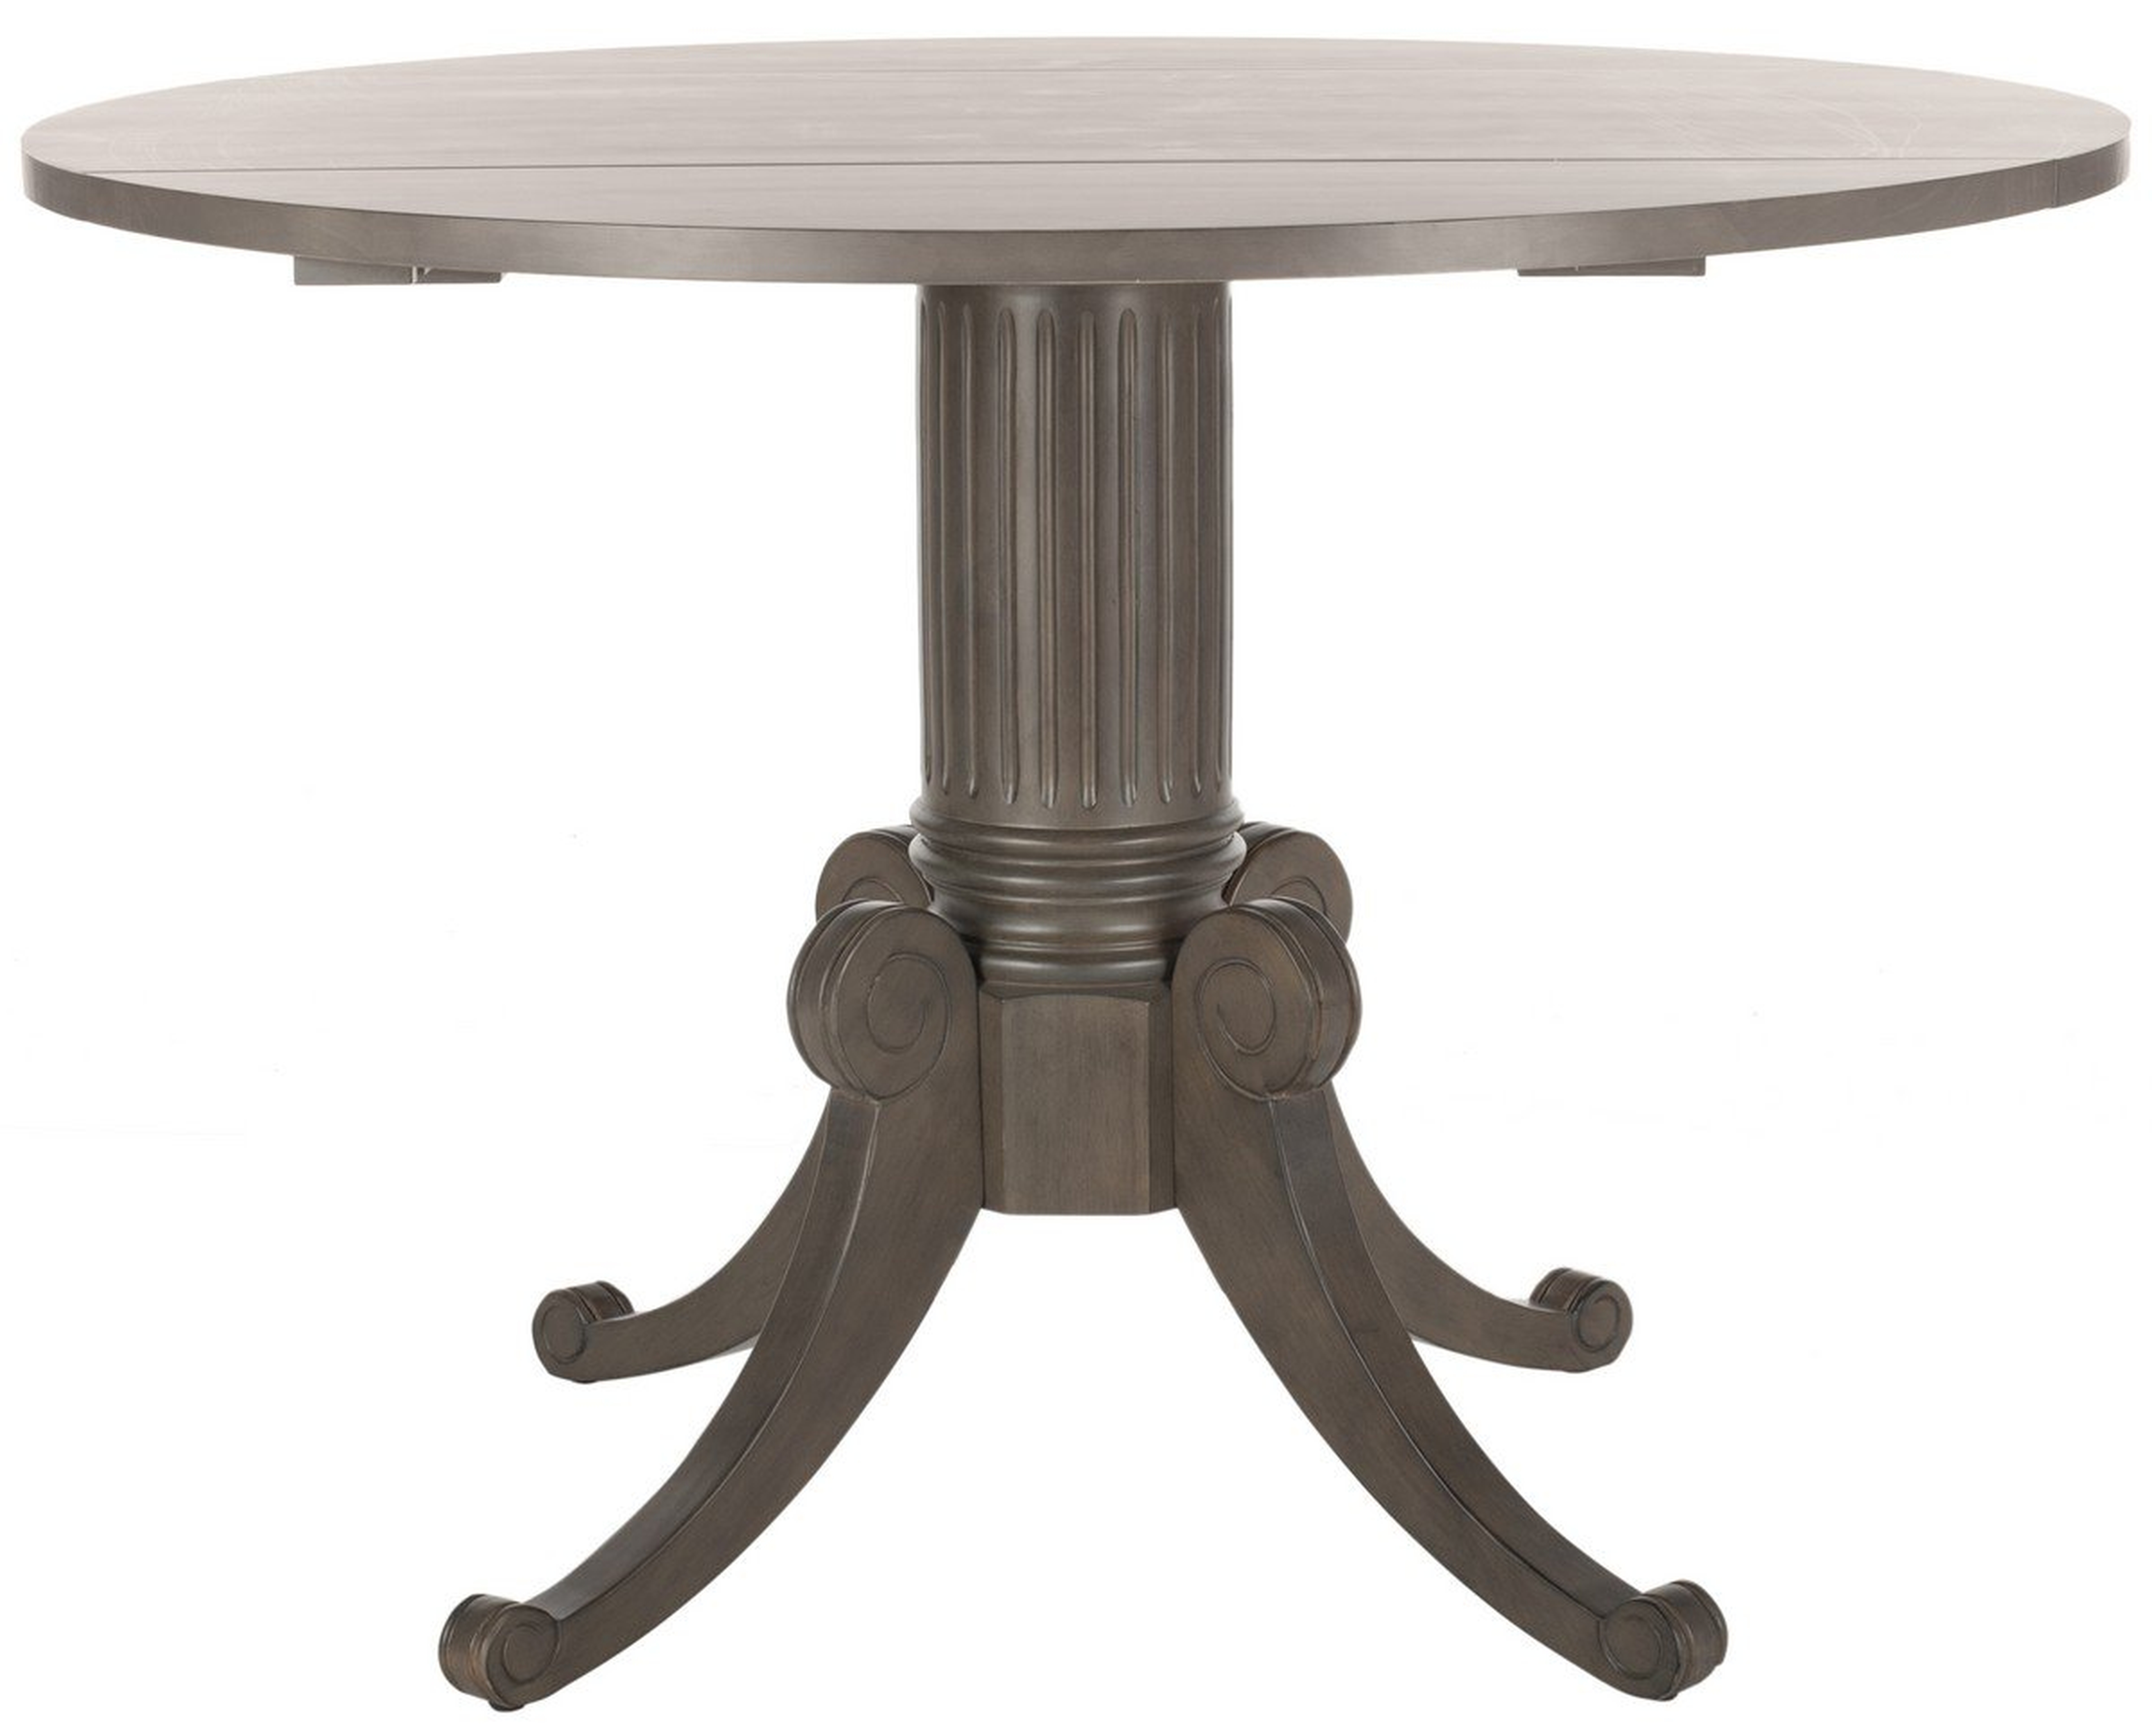 Forest Drop Leaf Dining Table - Grey Wash - Arlo Home - Arlo Home